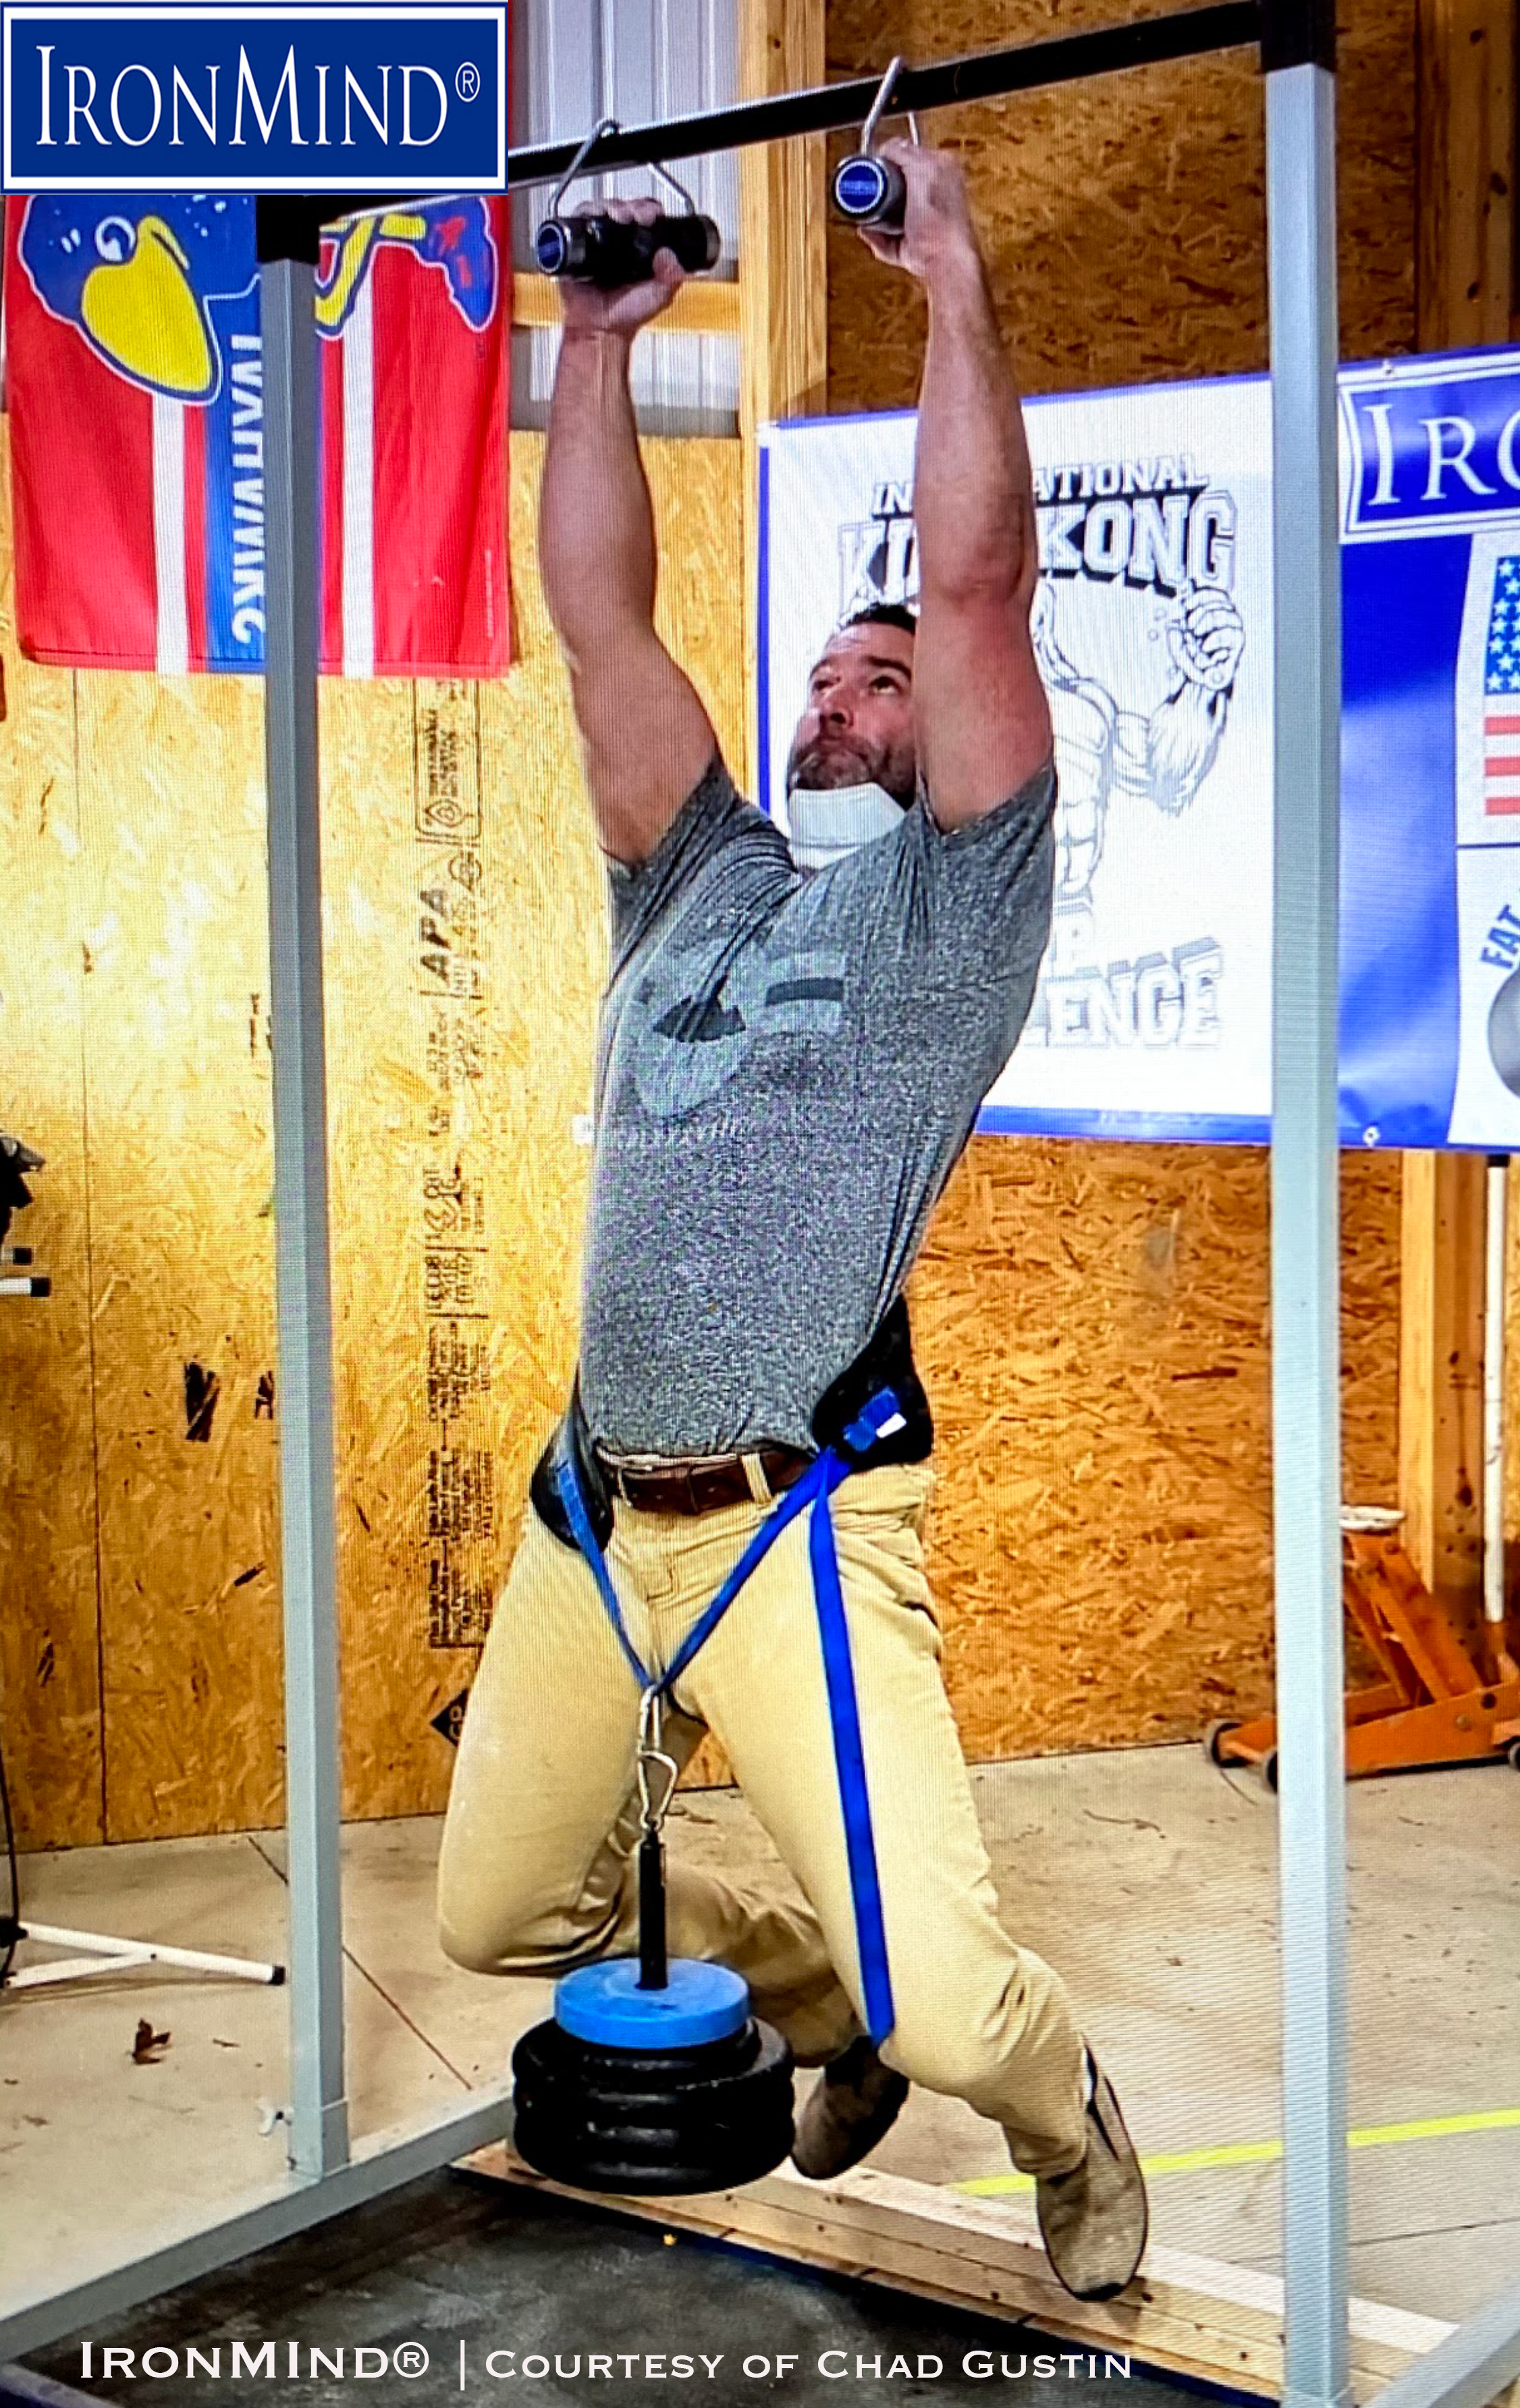 Emergency room medical doctor Chad Gustin has broken the world record for Rolling Thunder Pull-ups with a 166.92 kg (total weight) effort.  IronMind® | Courtest of Chad Gustin